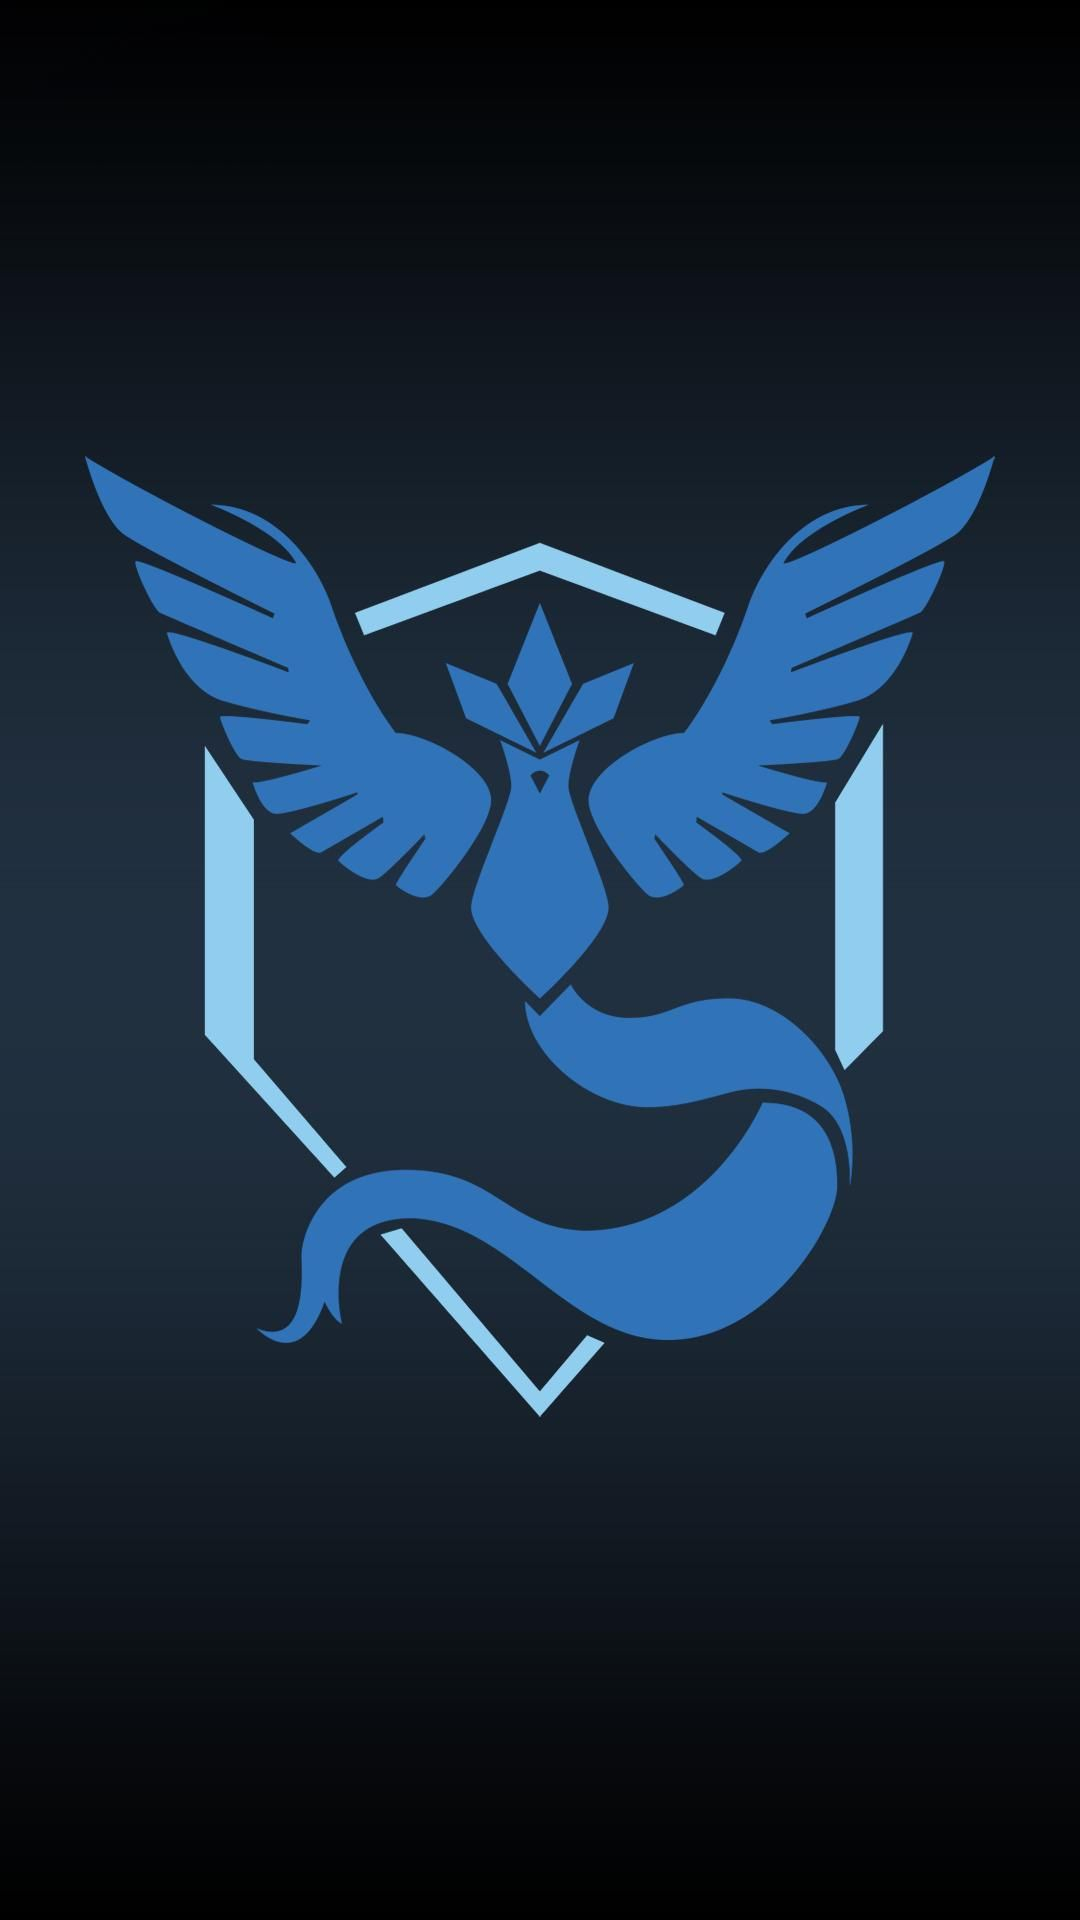 1080x1920 Slapped the Team Mystic Logo on some pictures. Here's 3 Team Mystic Phone Wallpapers! [] Need #iPhon&acirc;&#128;&brvbar; | Pokemon go team mystic, Team mystic, Team wallpaper